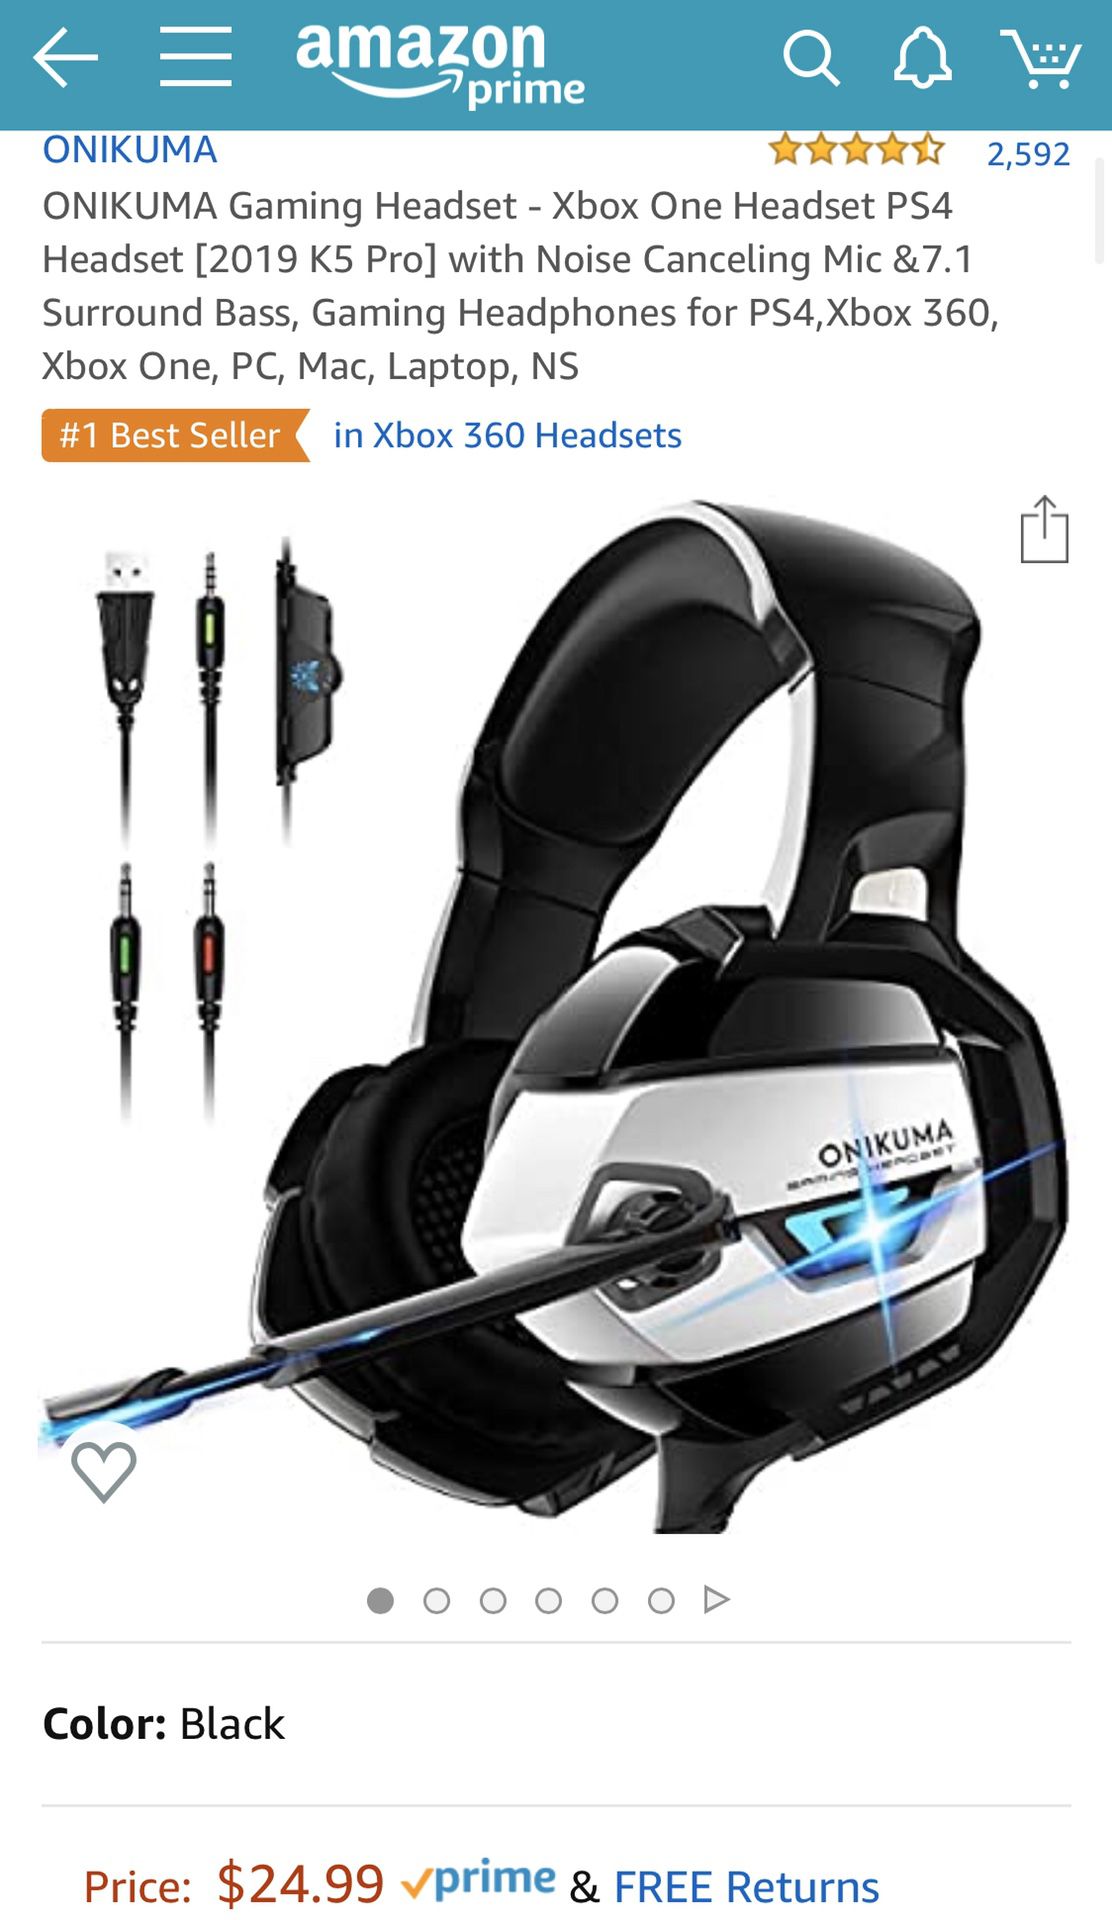 Gaming Headset-Xbox One Headset/PS4 Headset [2019 K5 Pro] w/Noise Canceling Mic&7.1 Surround Bass, Over Ear Gaming Headphones forXbox 360/Xbox One/PS